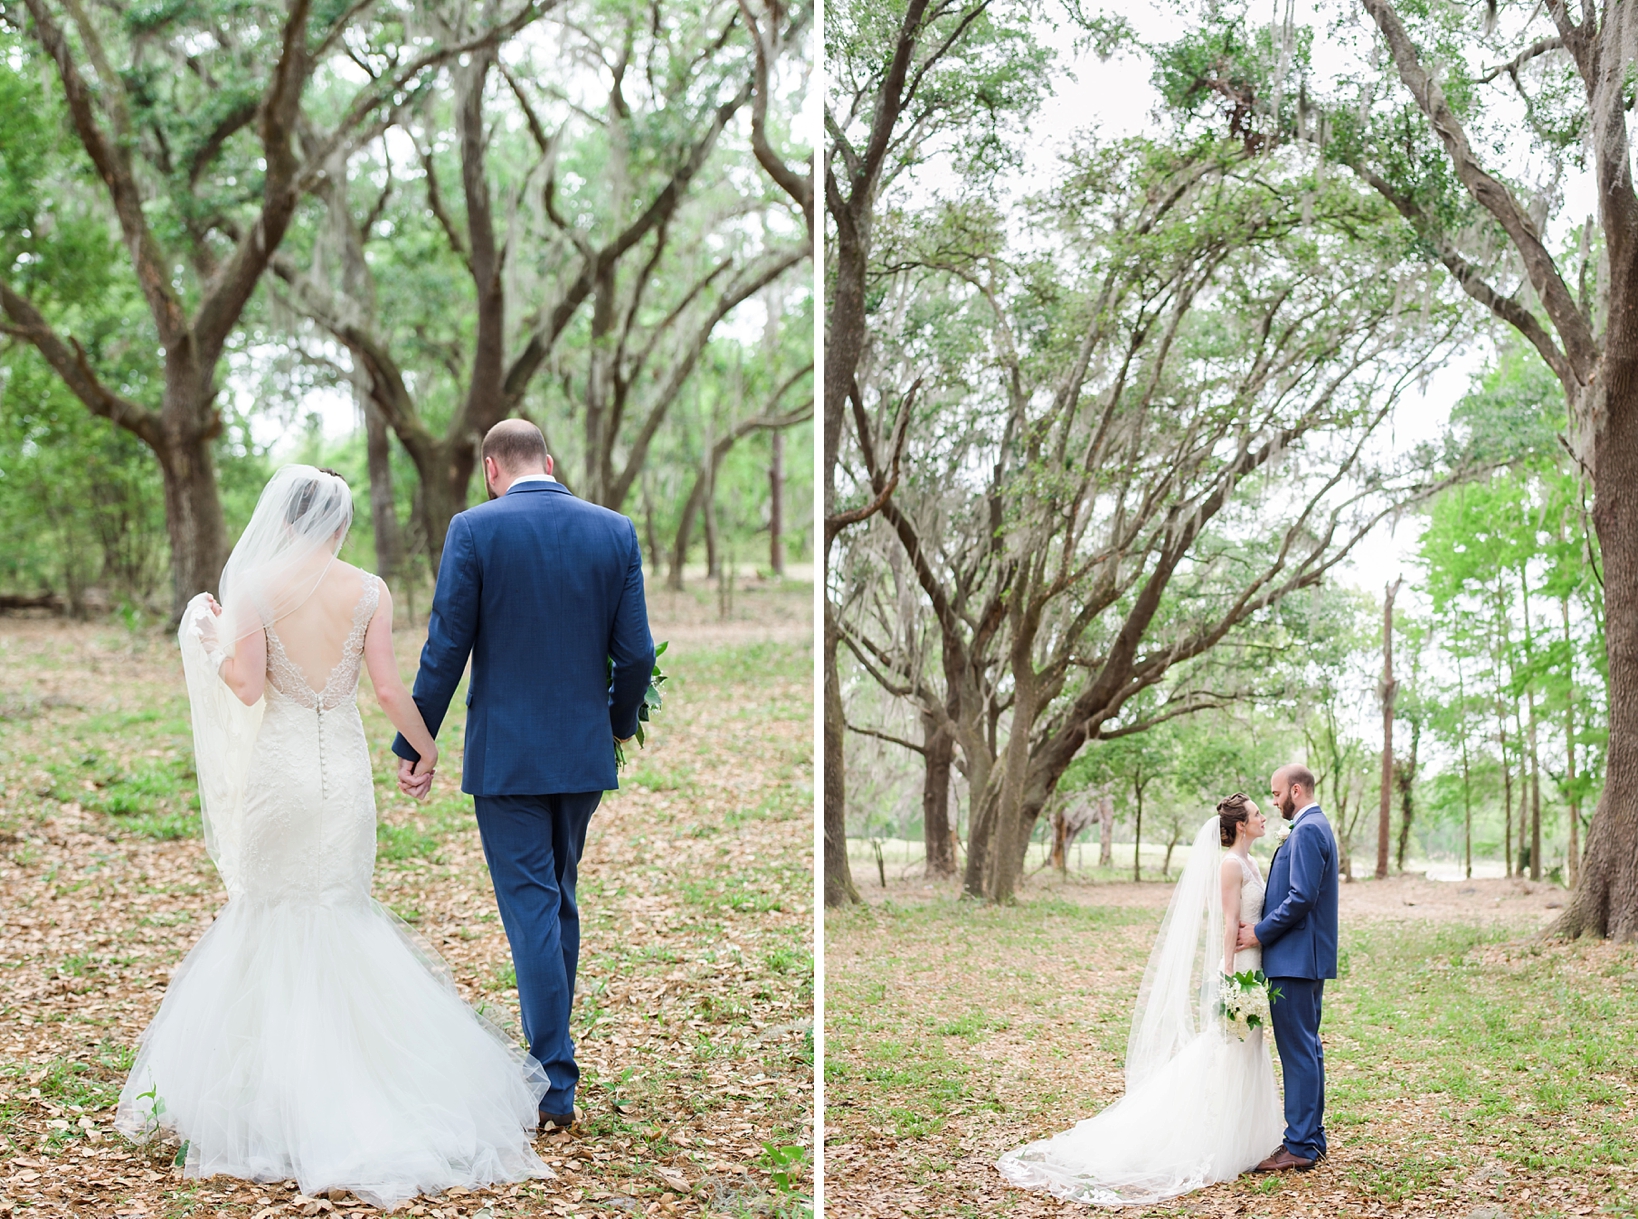 Rustic forest wedding photos by Sarah & Ben Photography